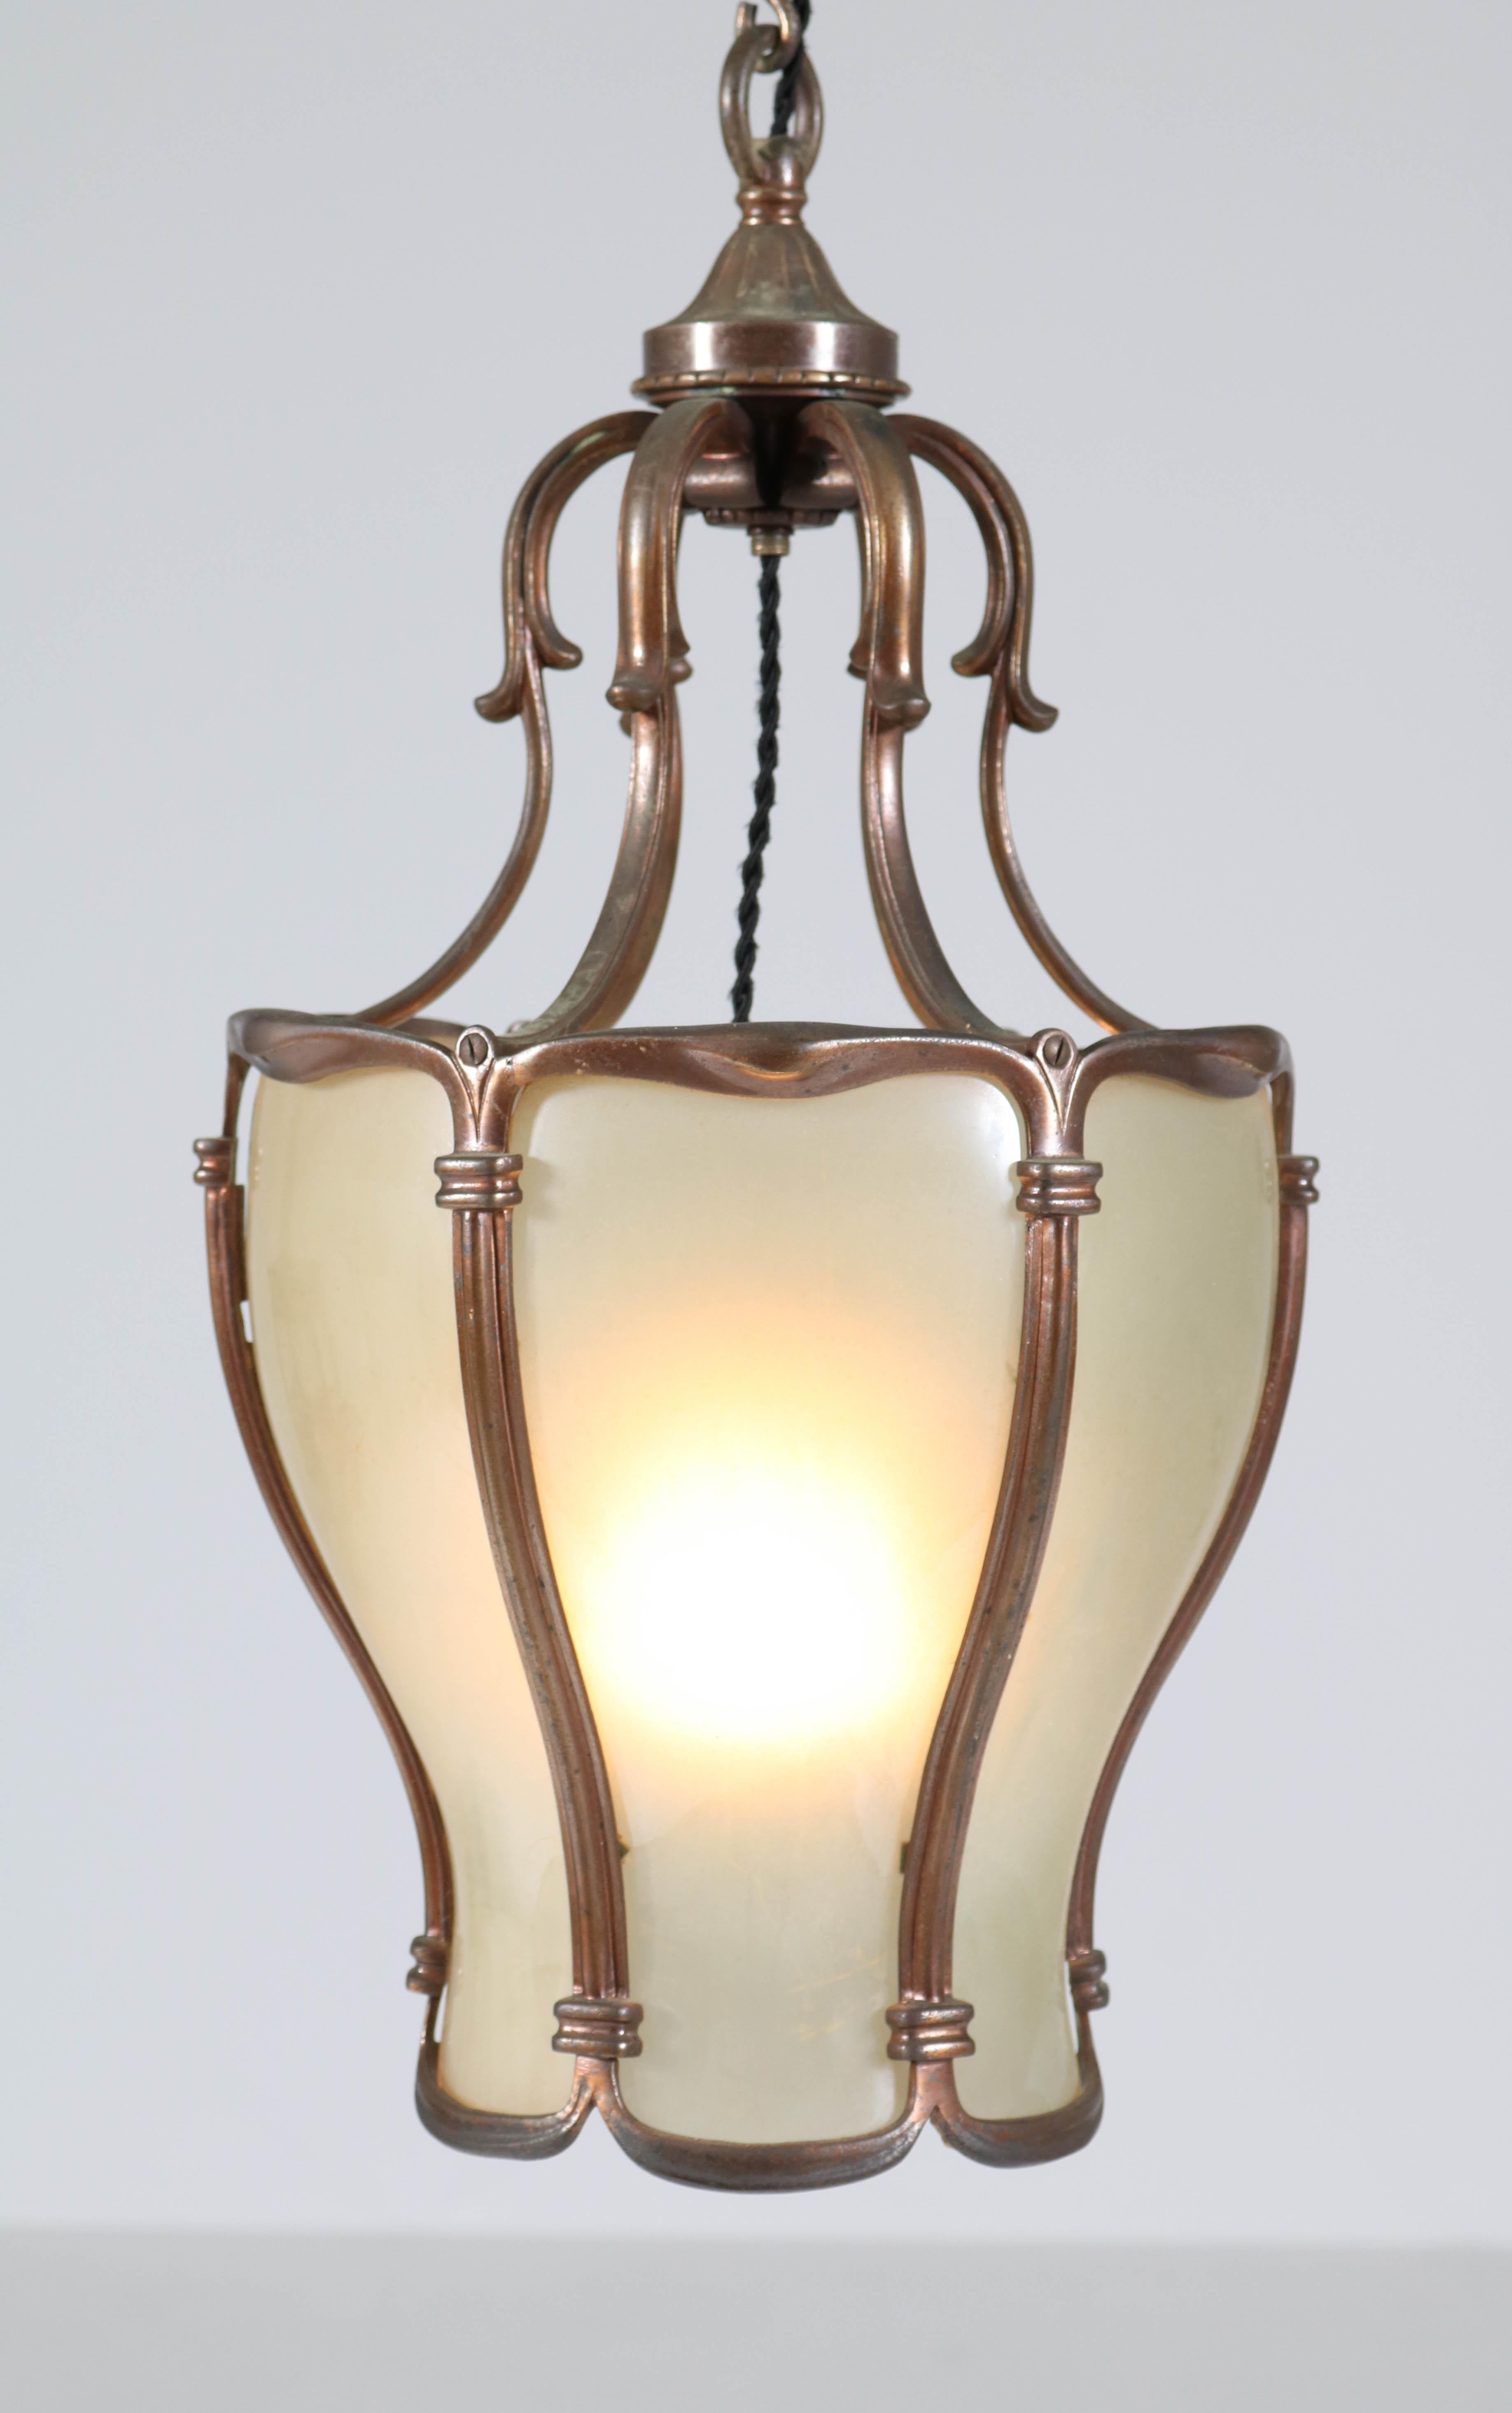 Mid-20th Century French Neoclassical Patinated Bronze Hall Lamp or Lantern, 1930s